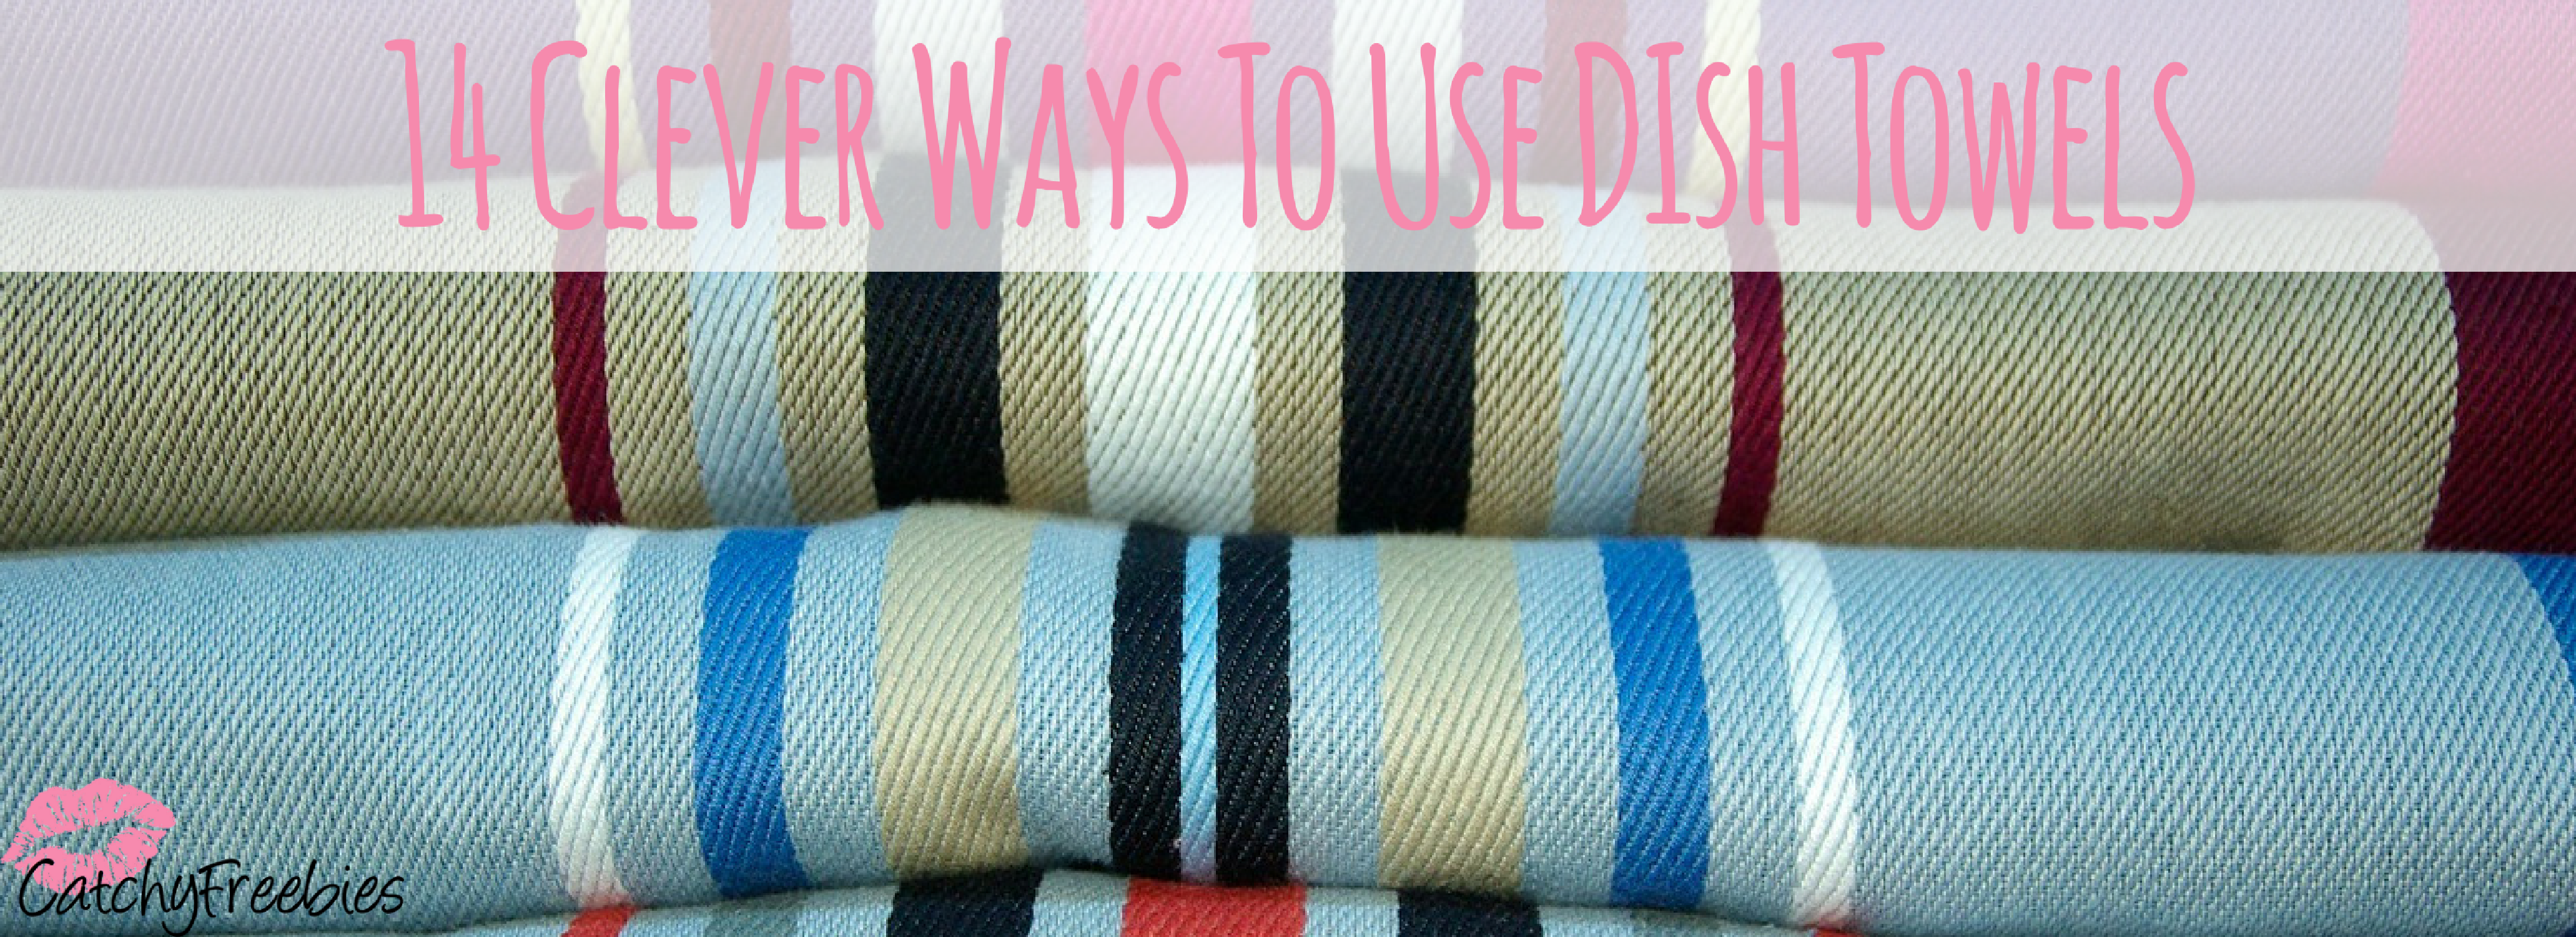 14 Clever Ways To Use Dish Towels -CatchyFreebies4125 x 1500